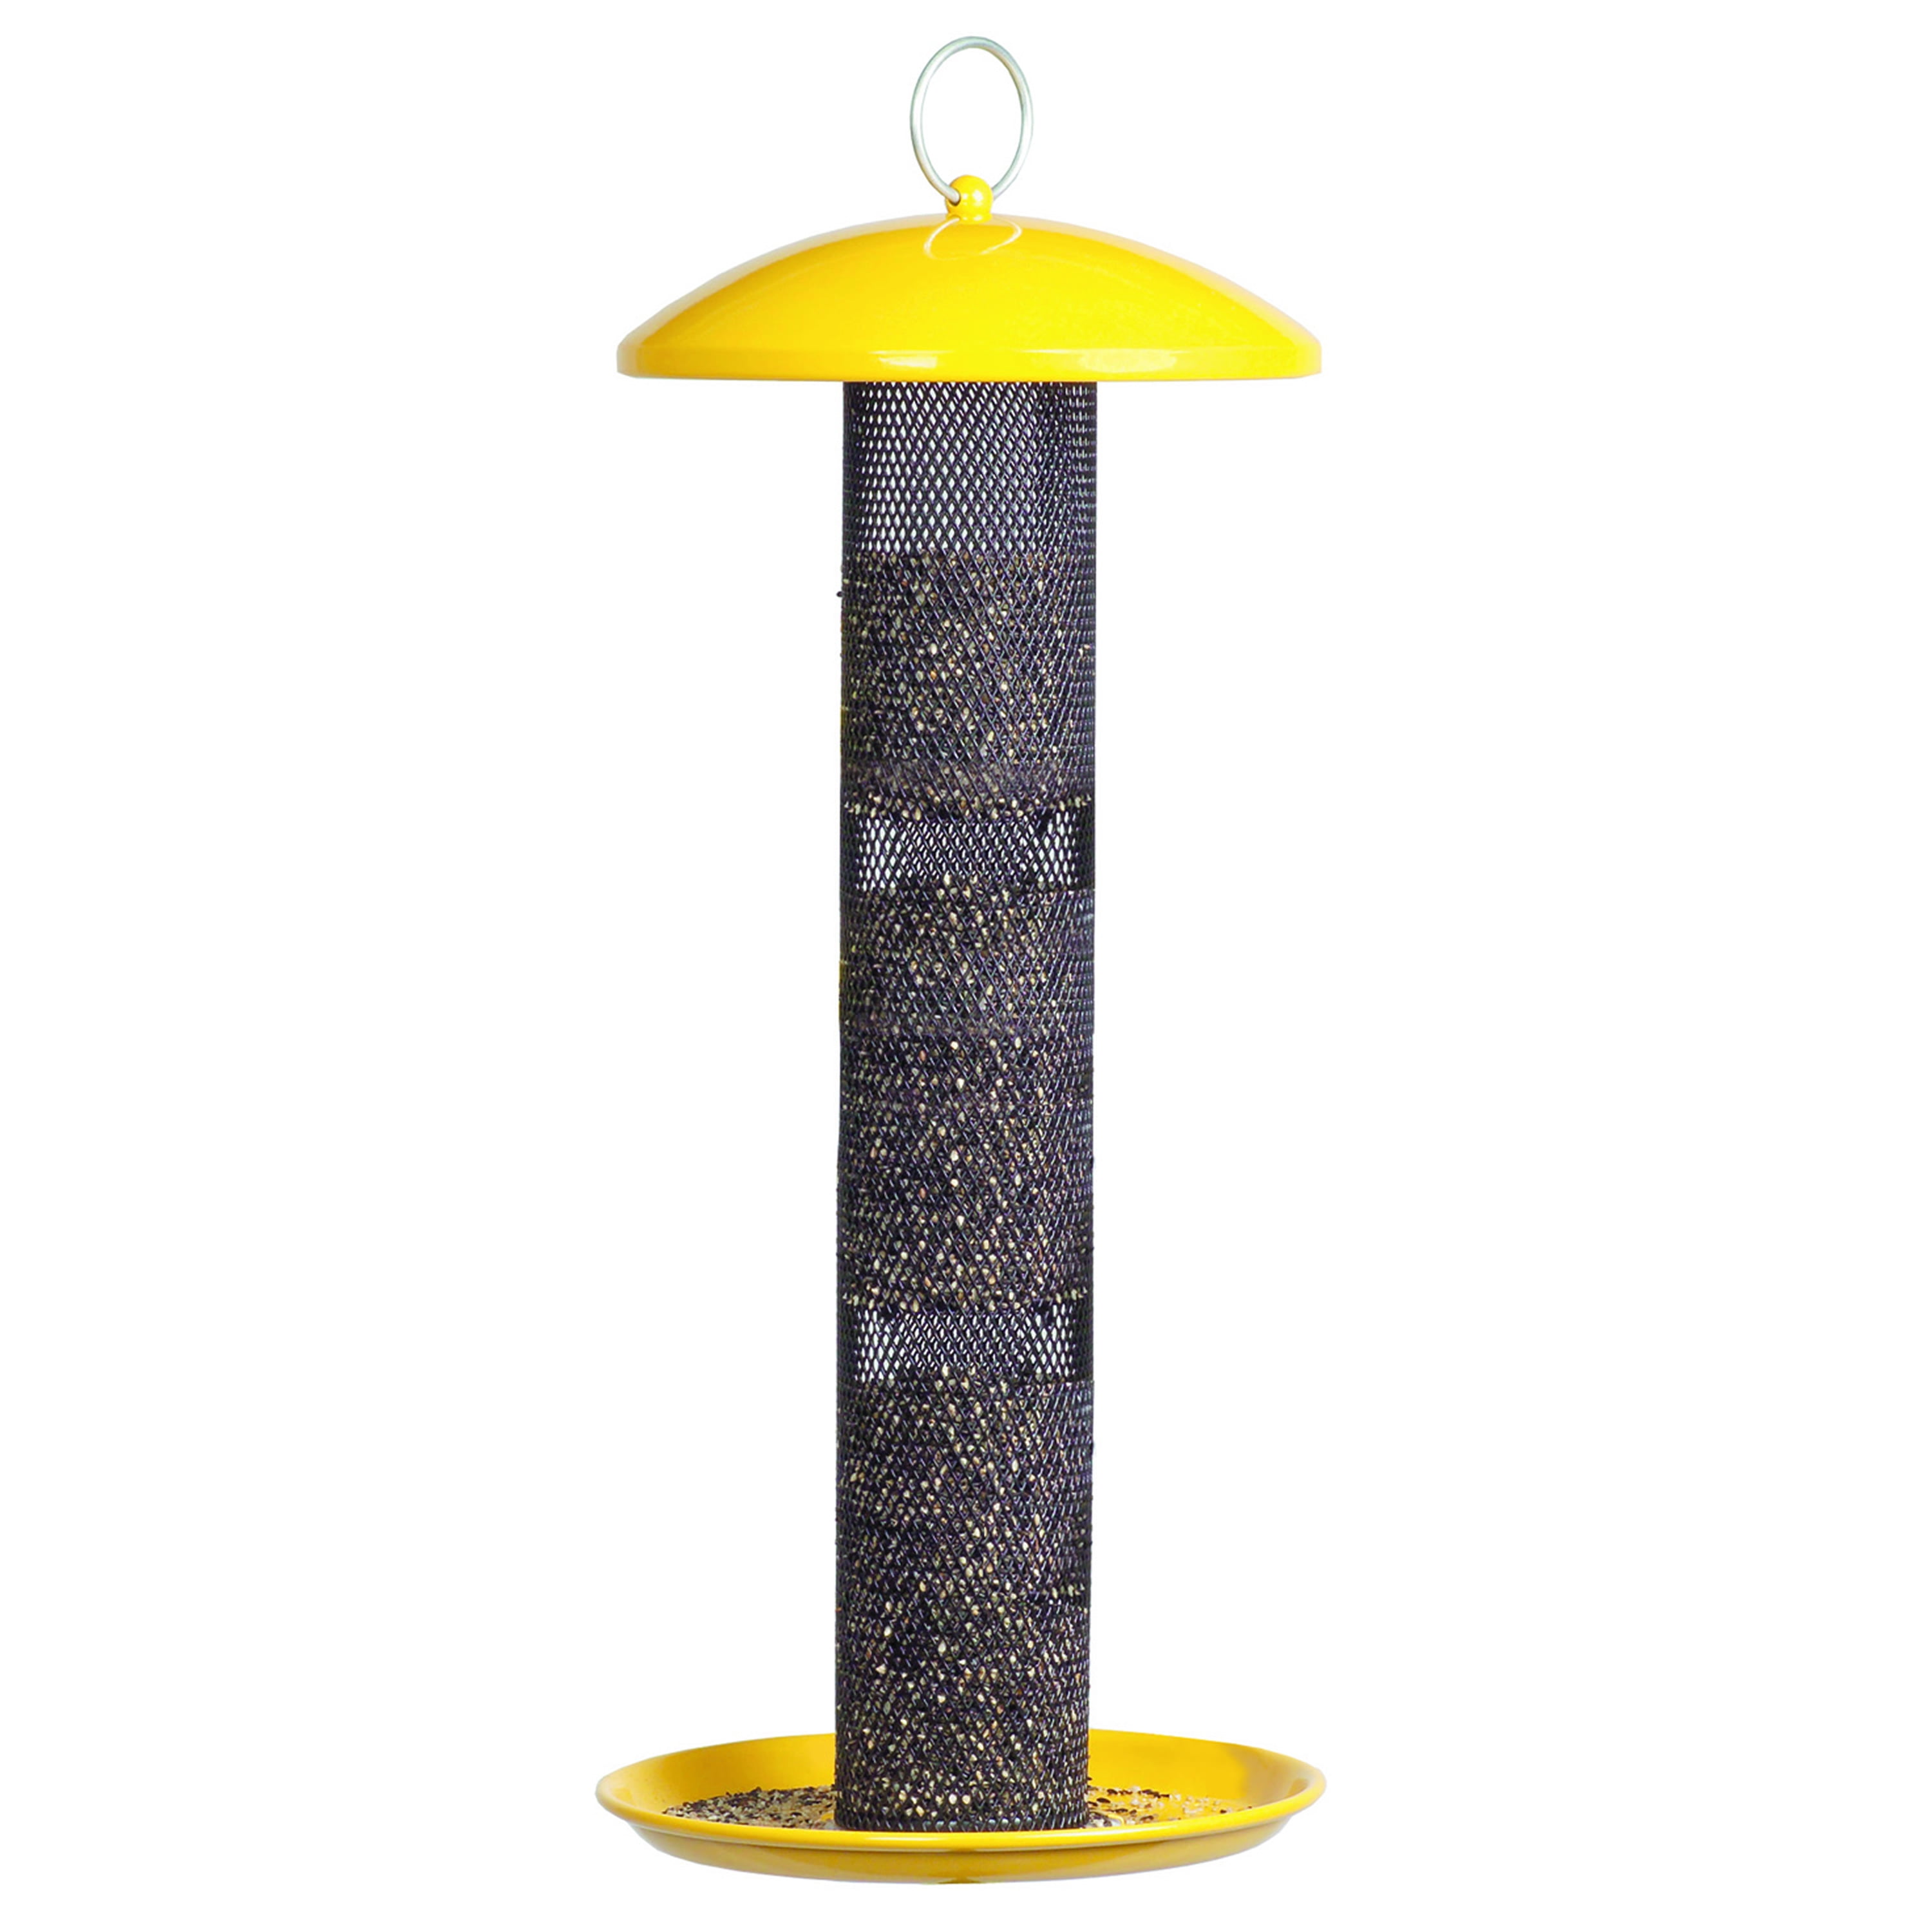 17-Inch Bronze Nature's Way Bird Products WS17-B Wide Deluxe Twist and Clean Sunflower Feeder 